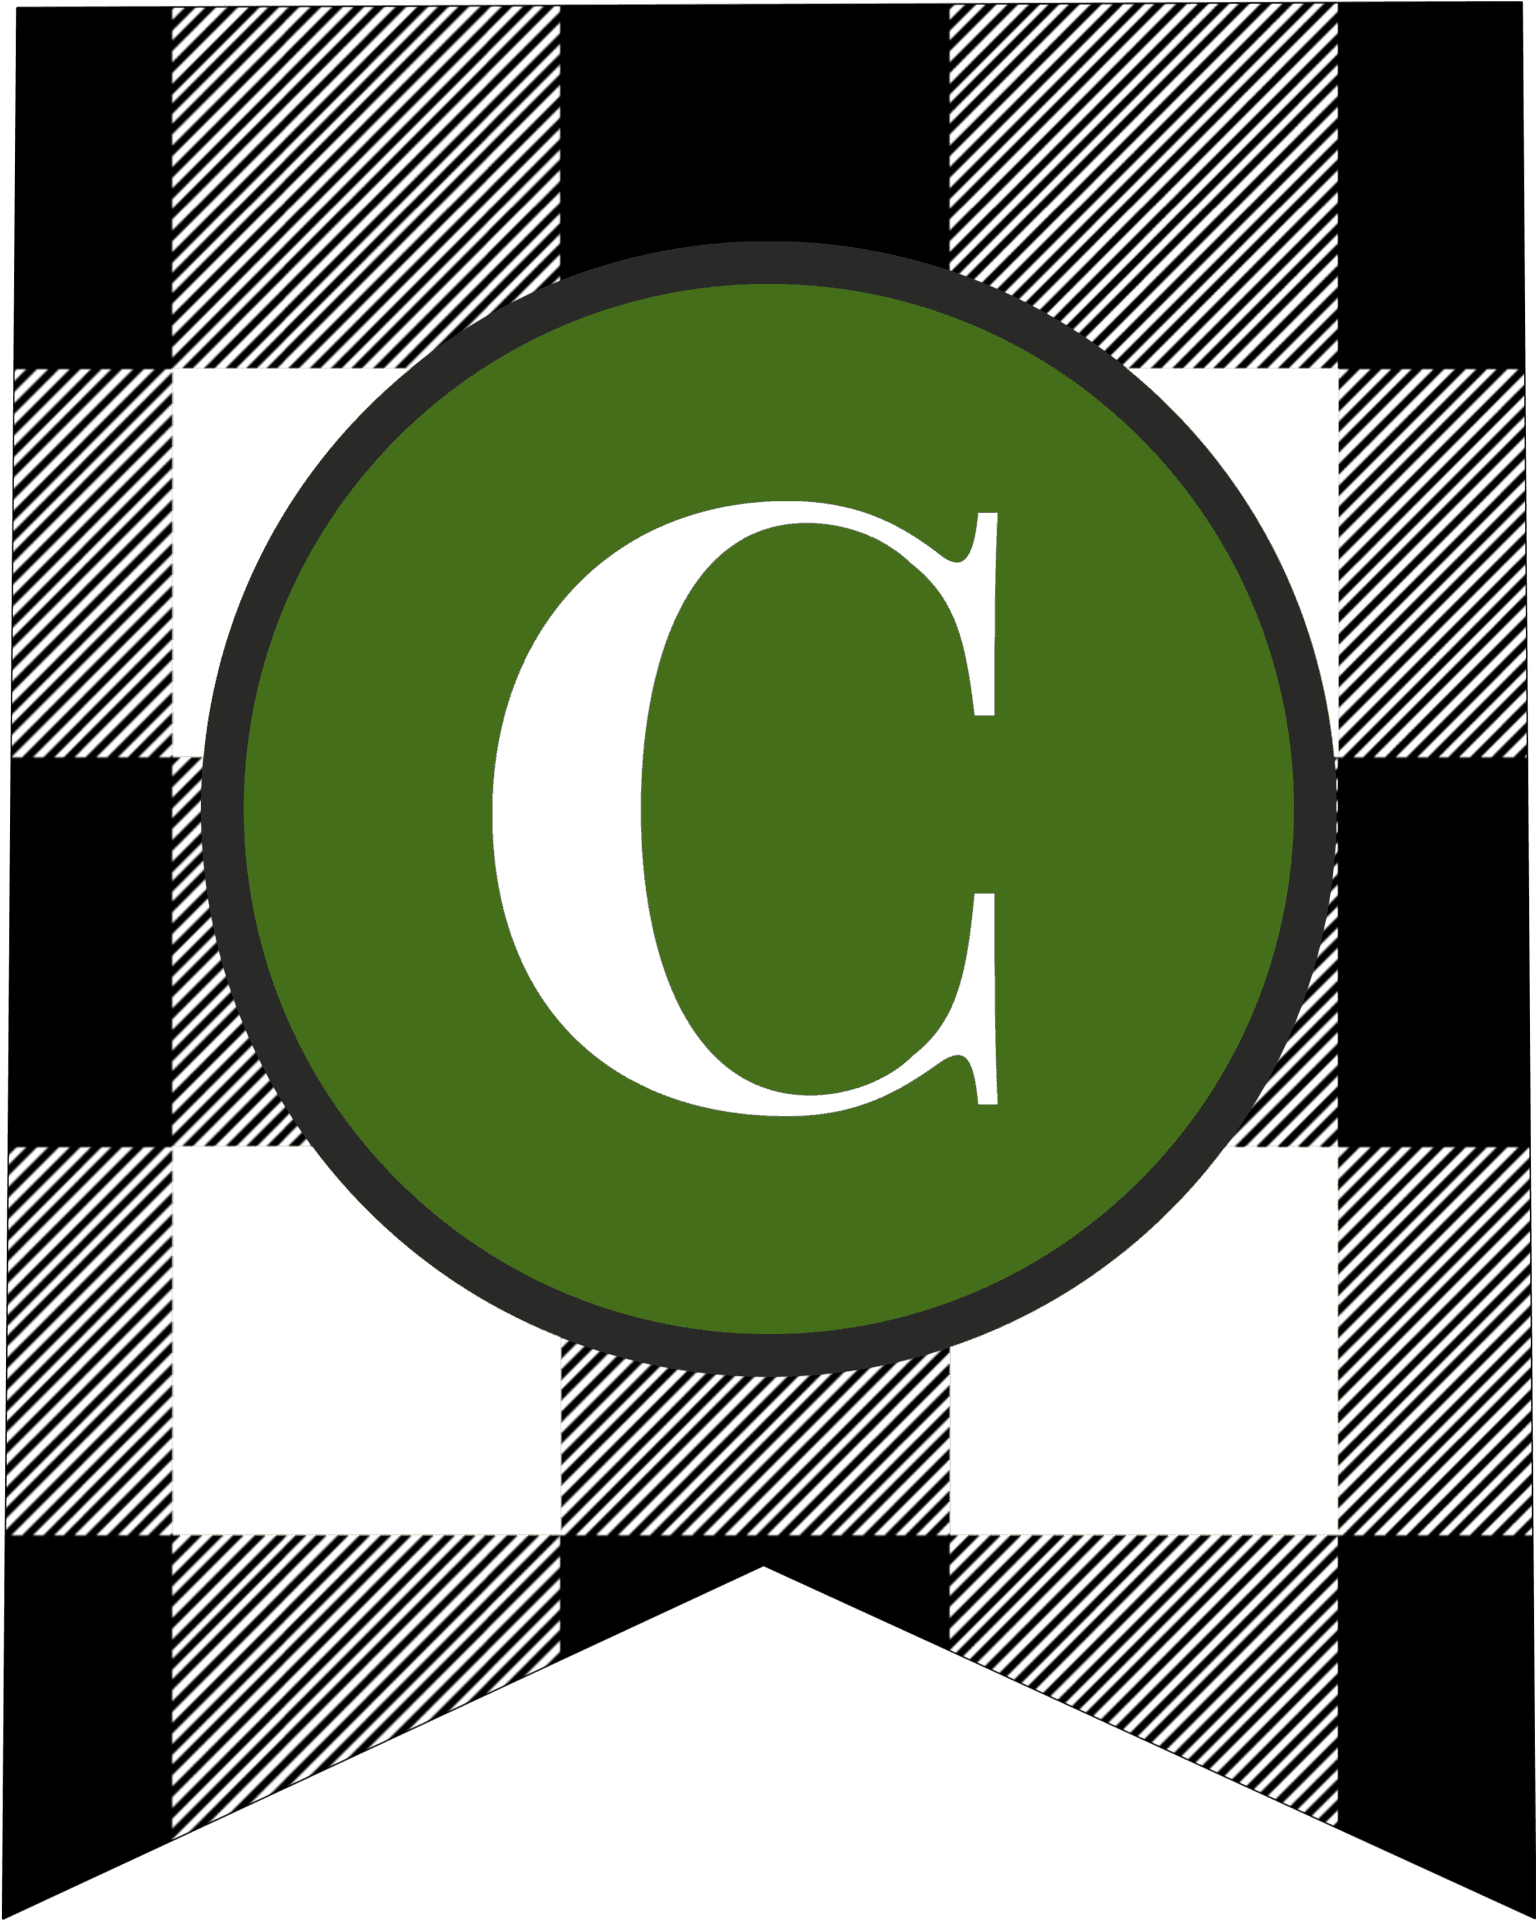 Abstract Letter C Design PNG